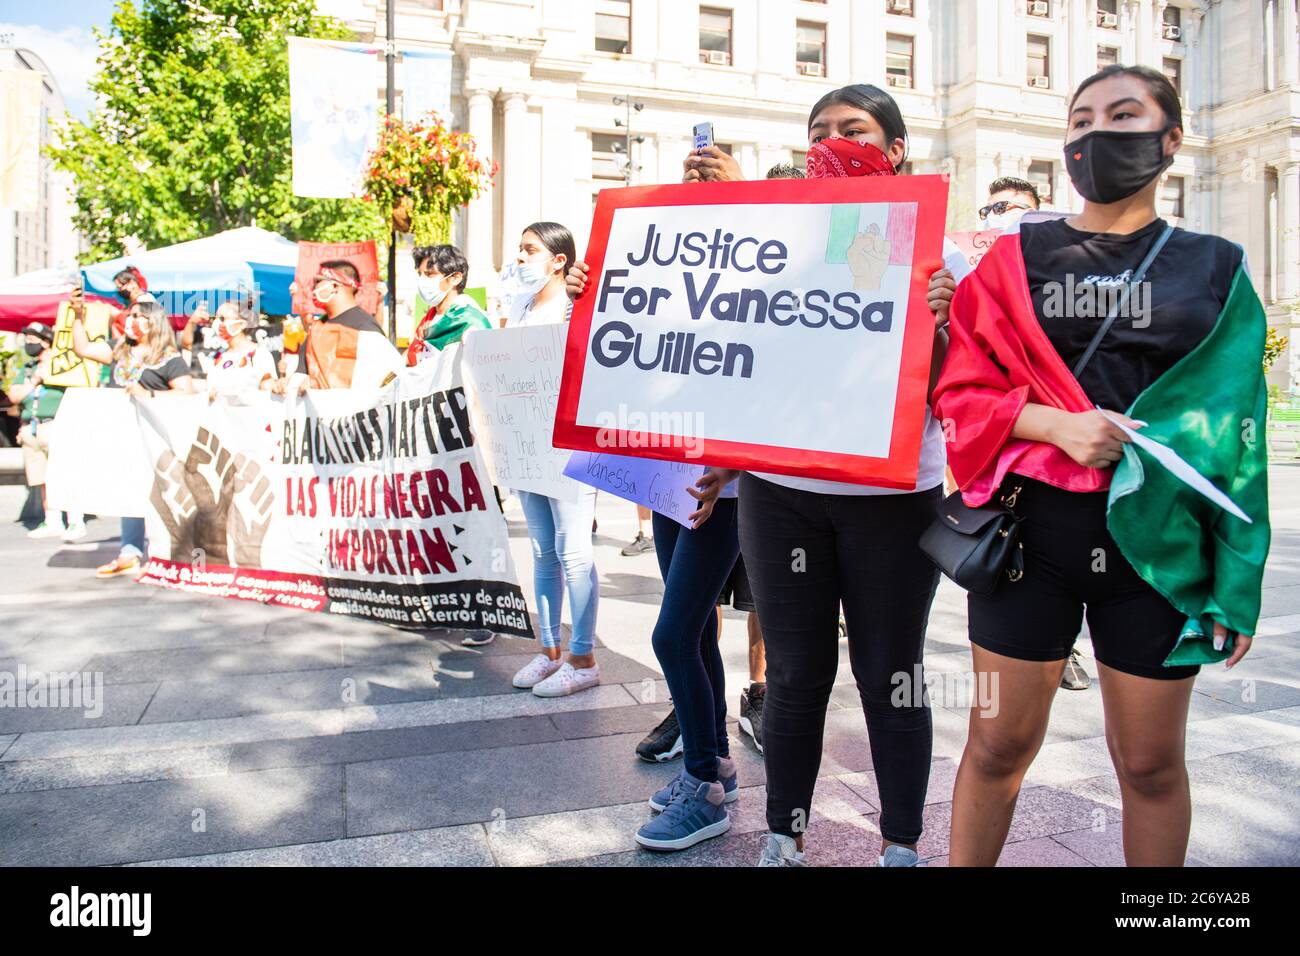 Philadelphia / USA. About one hundred people joined a march in Center City organized by Philadephia Latinx organizatoin, Juntos. Beginning at City Hall, the march progressed on Ben Franklin Boulevard and ended at the Art Museum. July 12, 2020. Credit: Christopher Evens / Alamy Live News Stock Photo